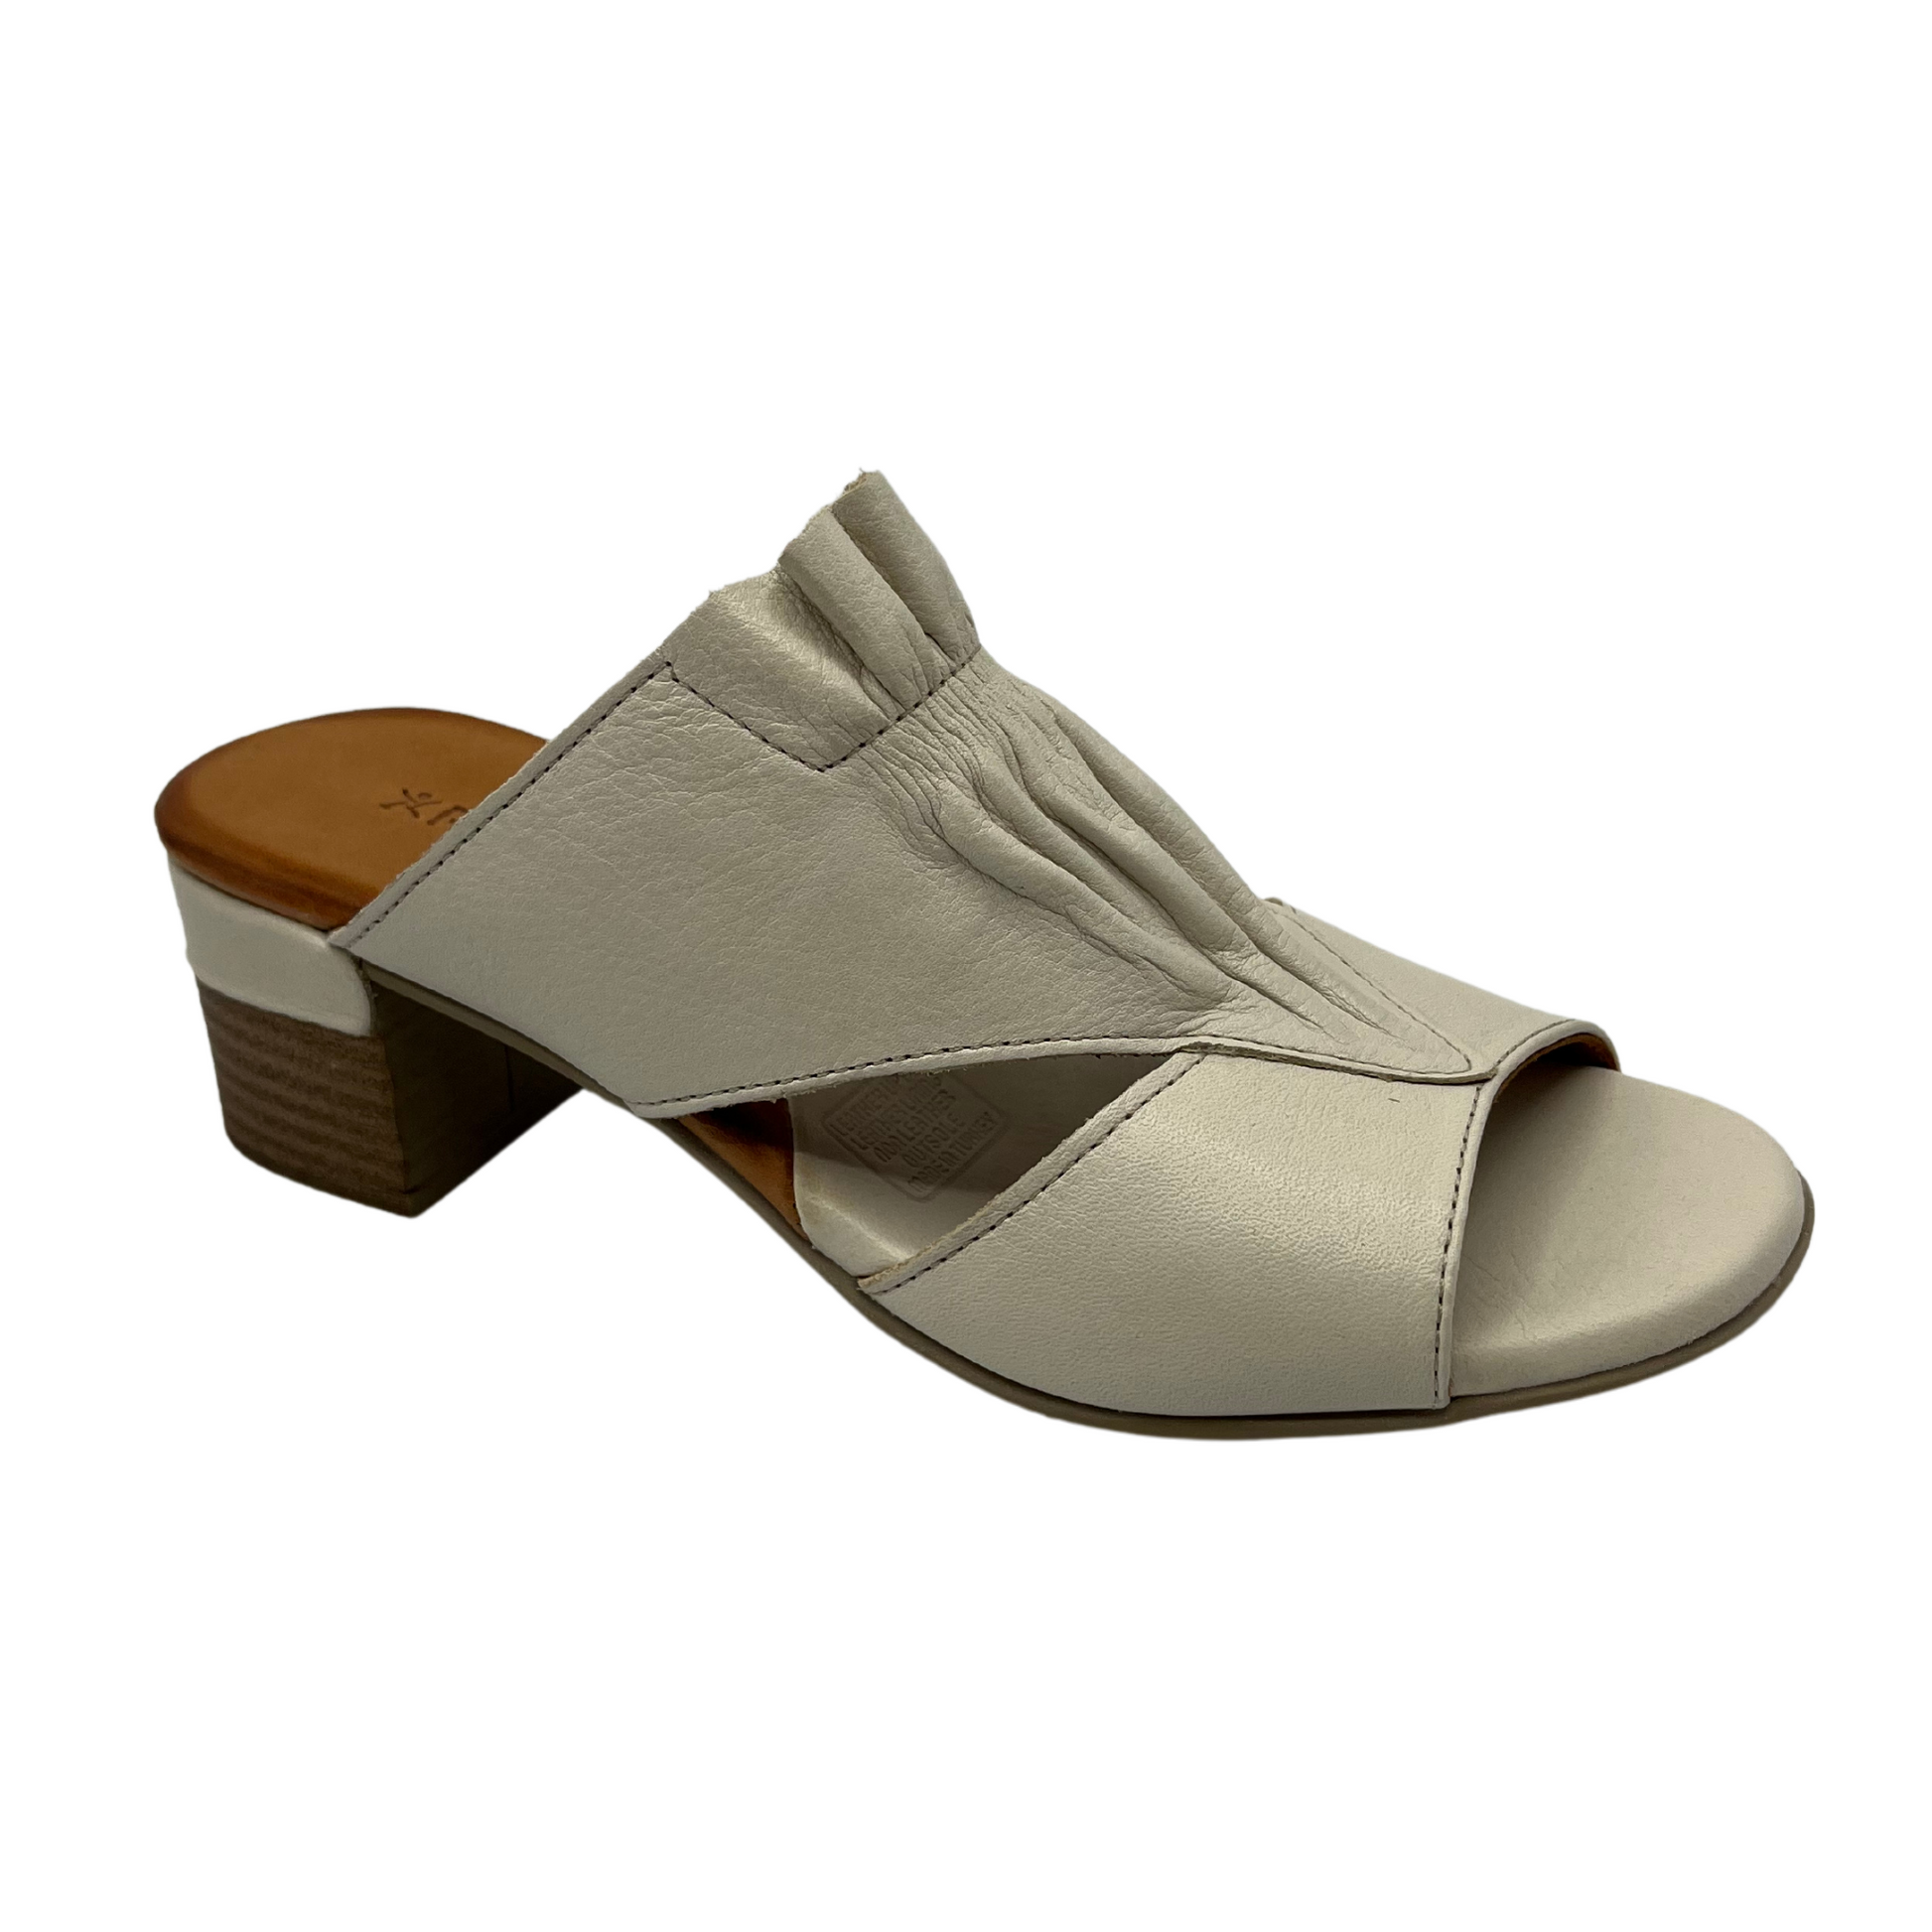 45 degree angled view of white leather sandal with block heel and peep toe